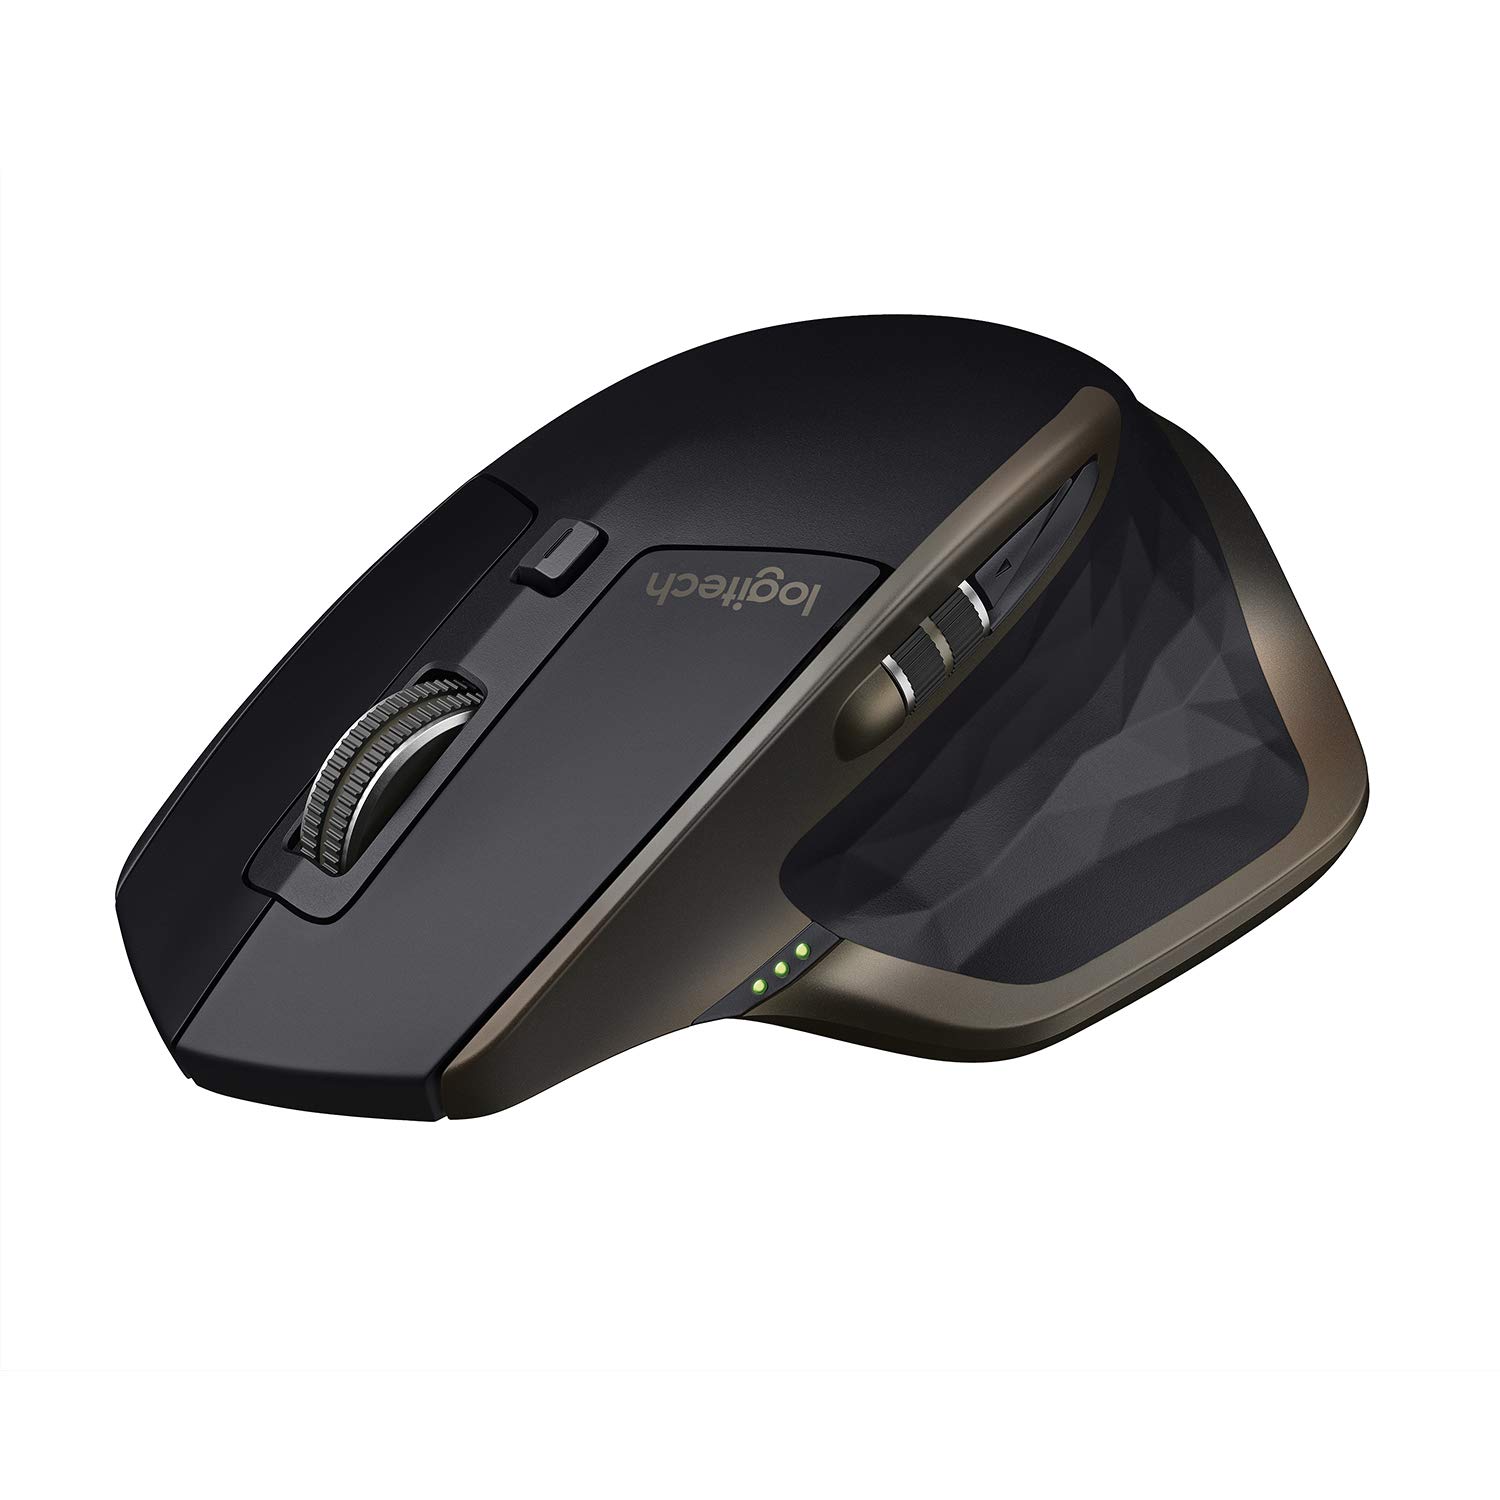 logitech mx master wireless mouse for windows and mac